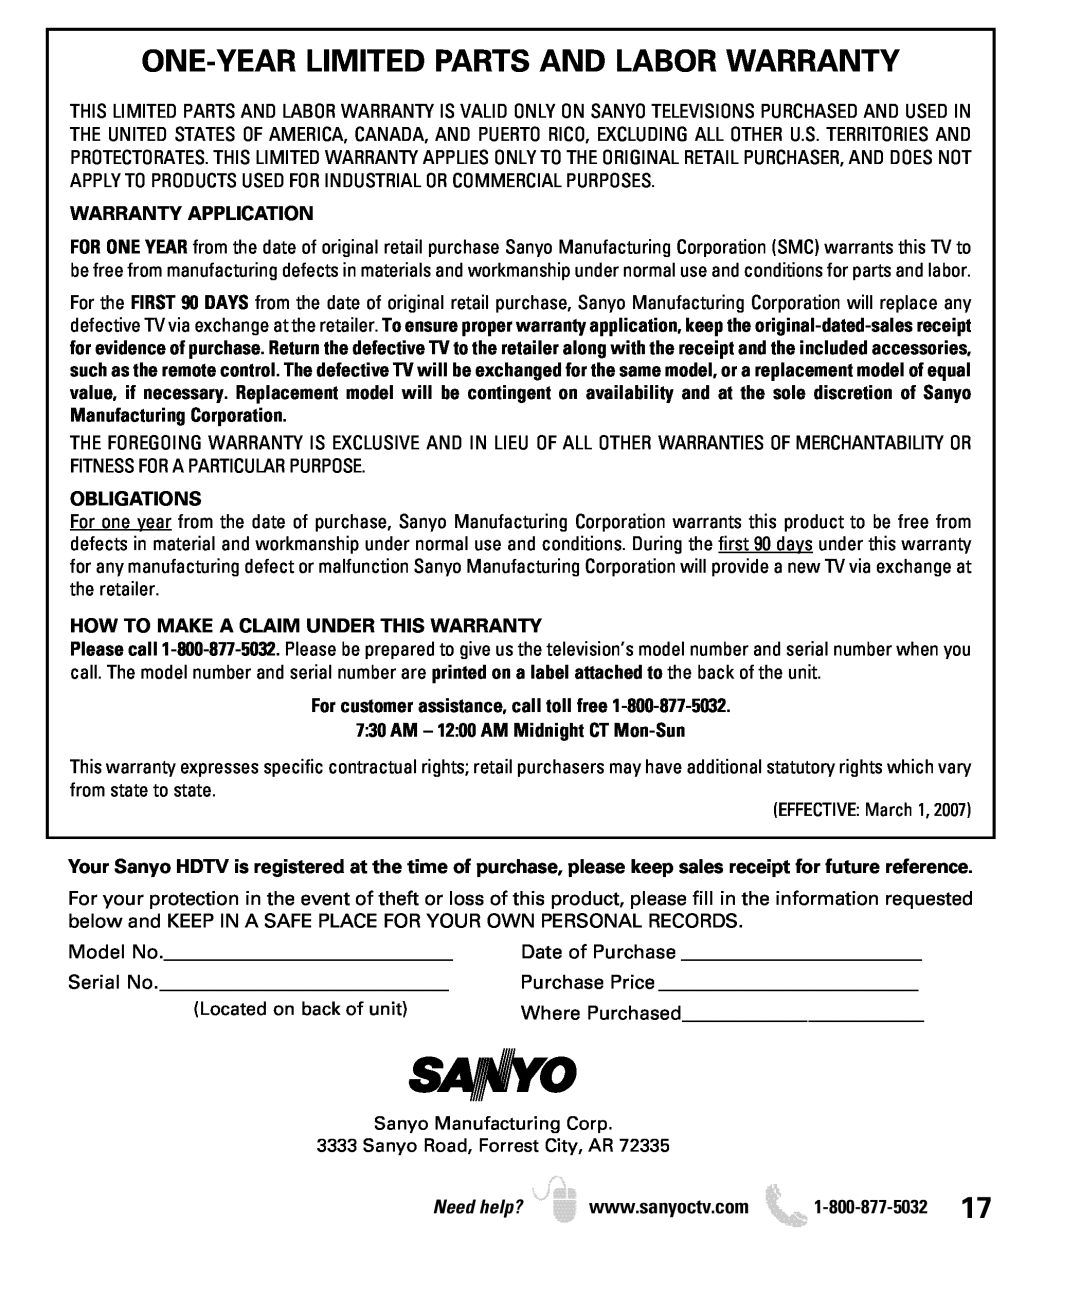 Sanyo DP19649, DP26649 owner manual One-Year Limited Parts And Labor Warranty, Warranty Application, Obligations 